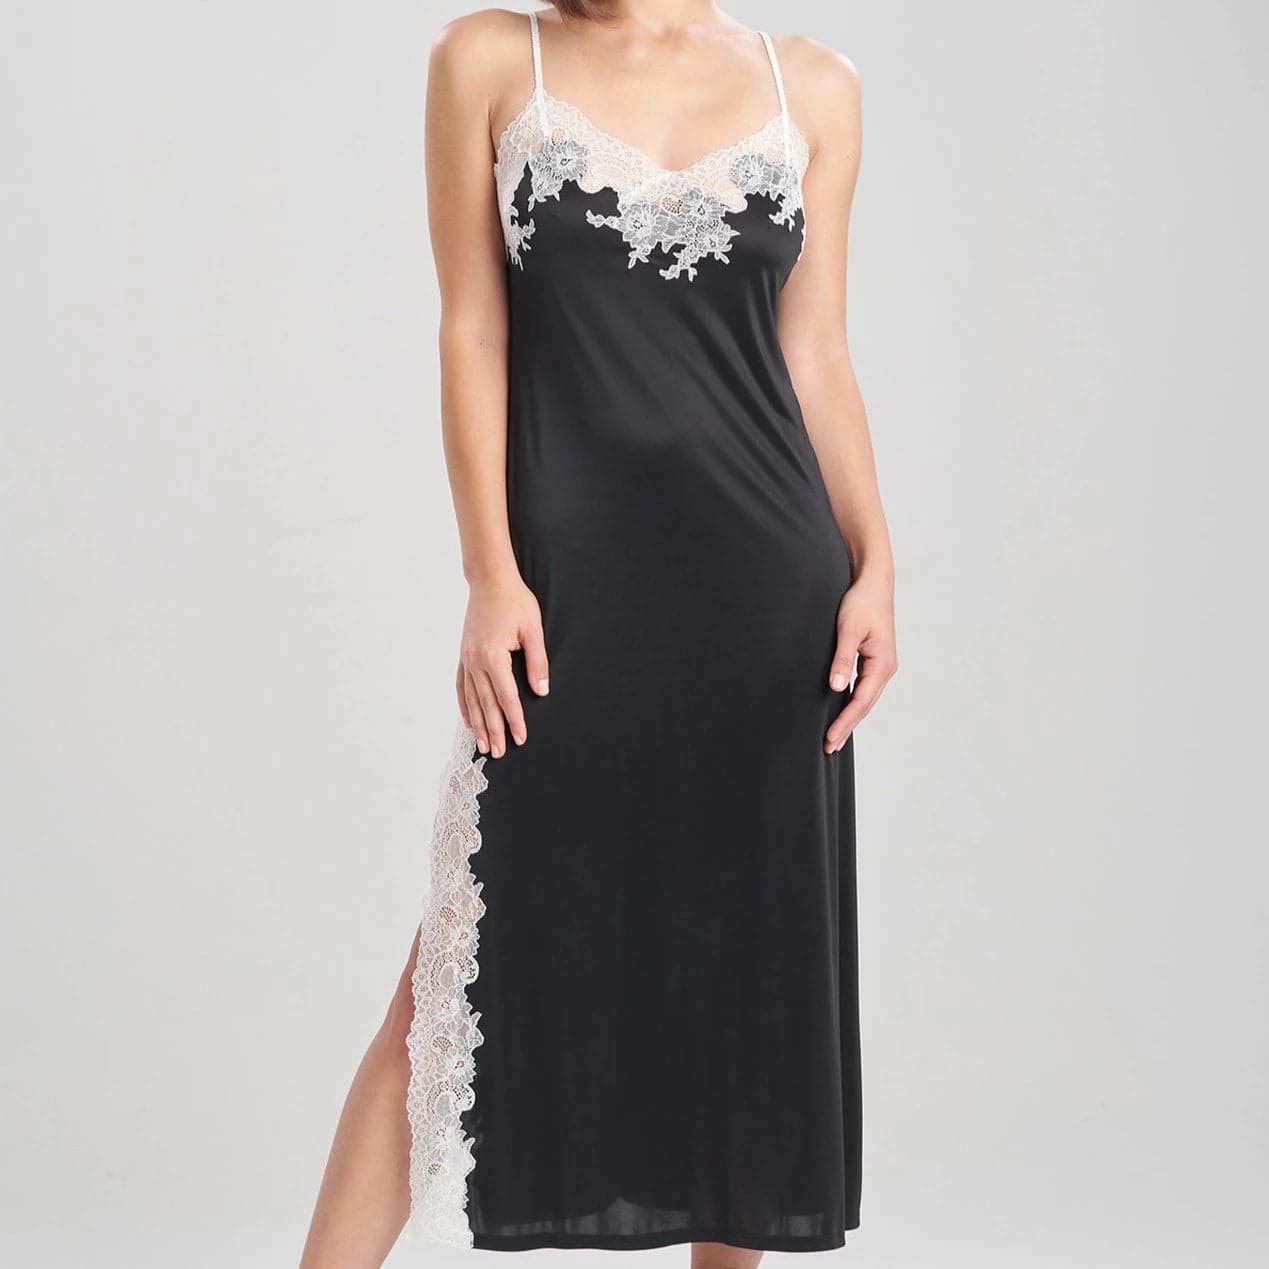 Natori Enchant Lace Slit Gown in Black with Ivory Lace P73012-Loungewear-Natori-Black and Ivory-Small-Anna Bella Fine Lingerie, Reveal Your Most Gorgeous Self!